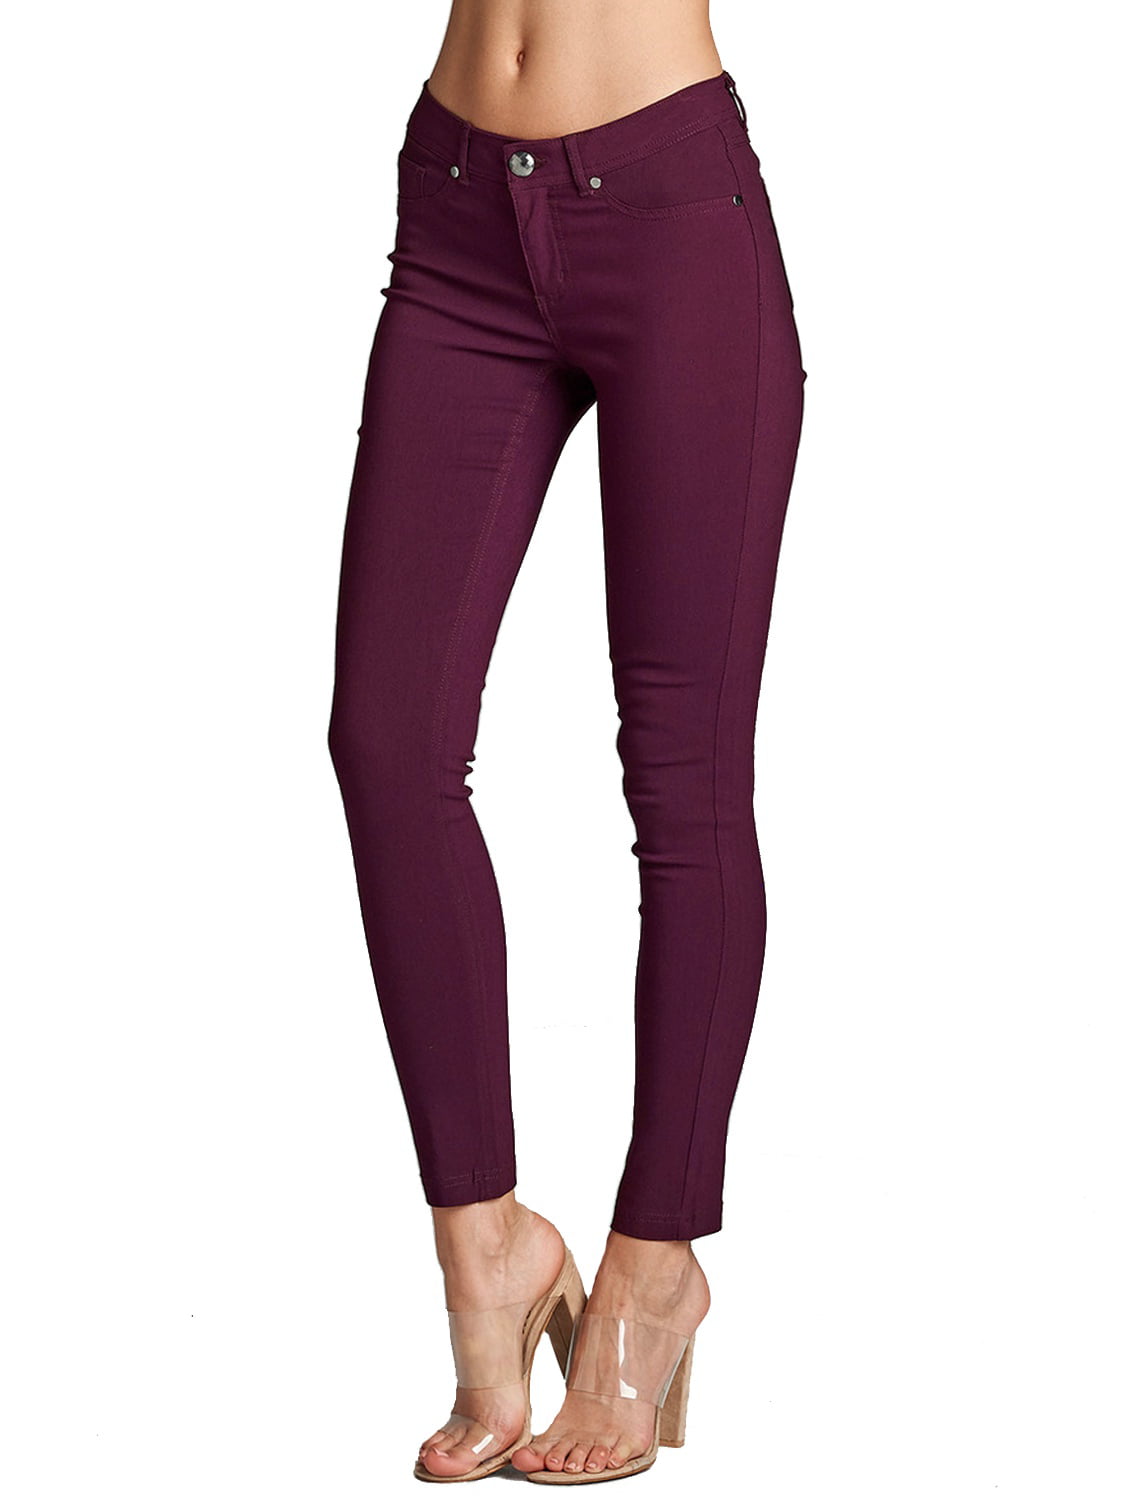 Womens Basic Stretch Spandex Solid Color Comfy Skinny Jeggings Pants Plus Size Available Fast 